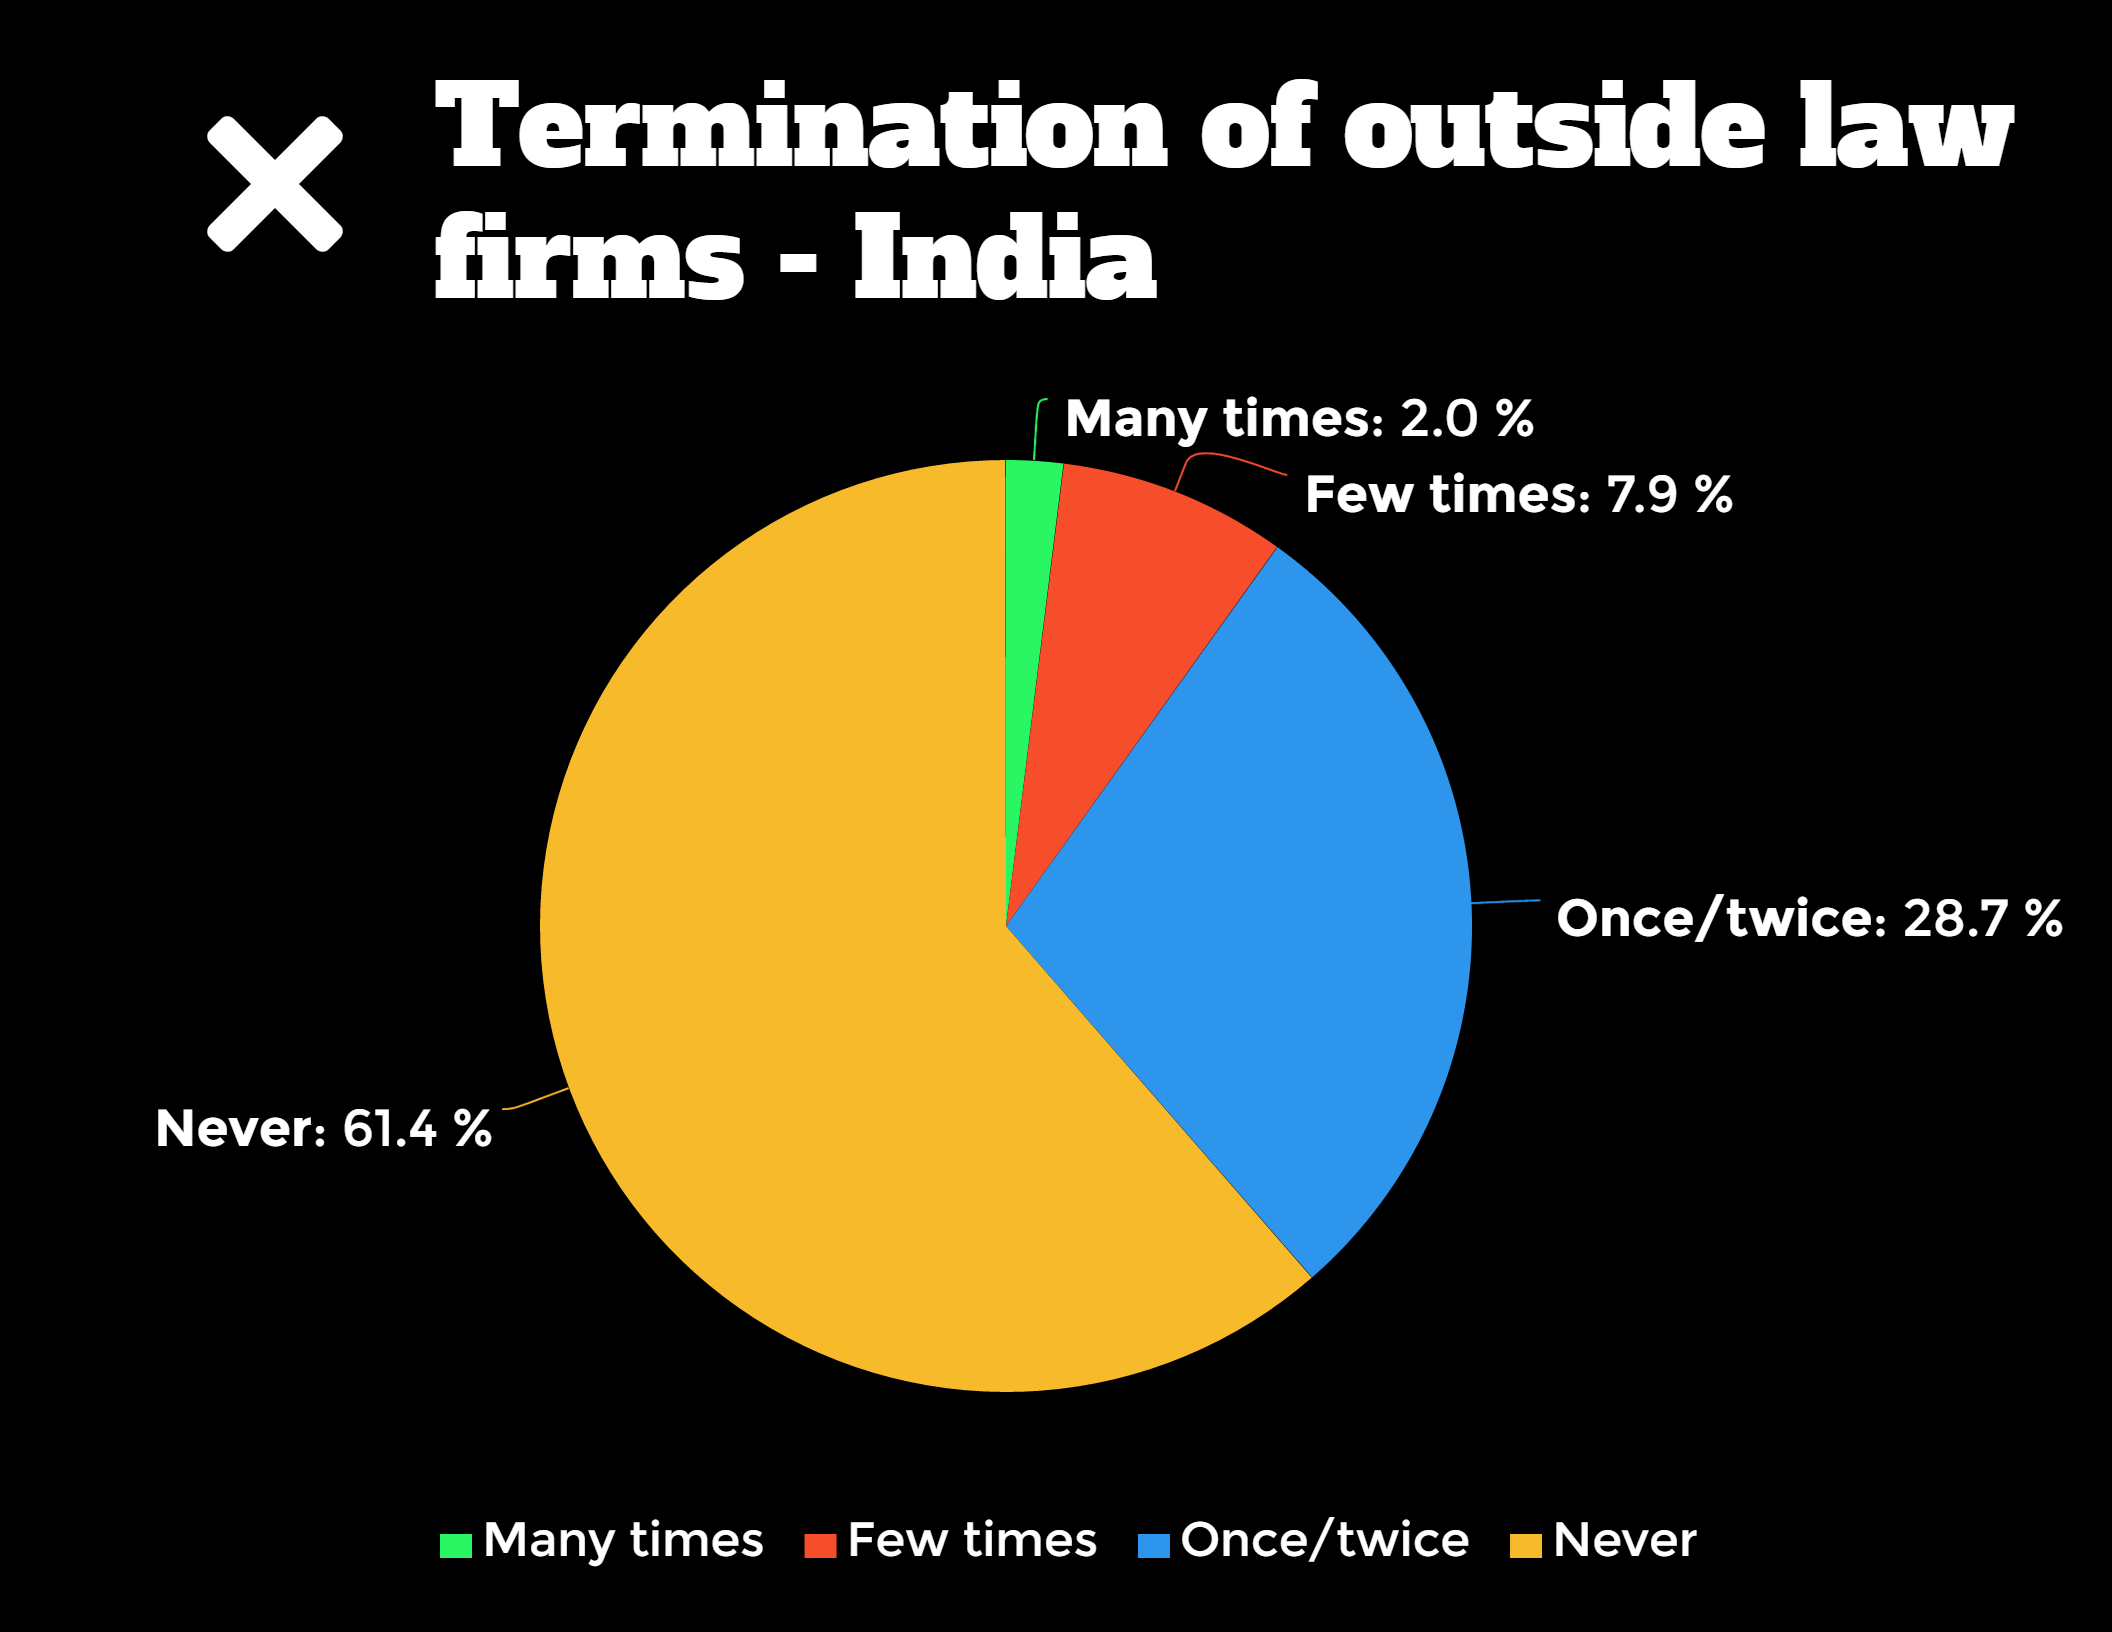 Frequency of terminated outside law firms in India.